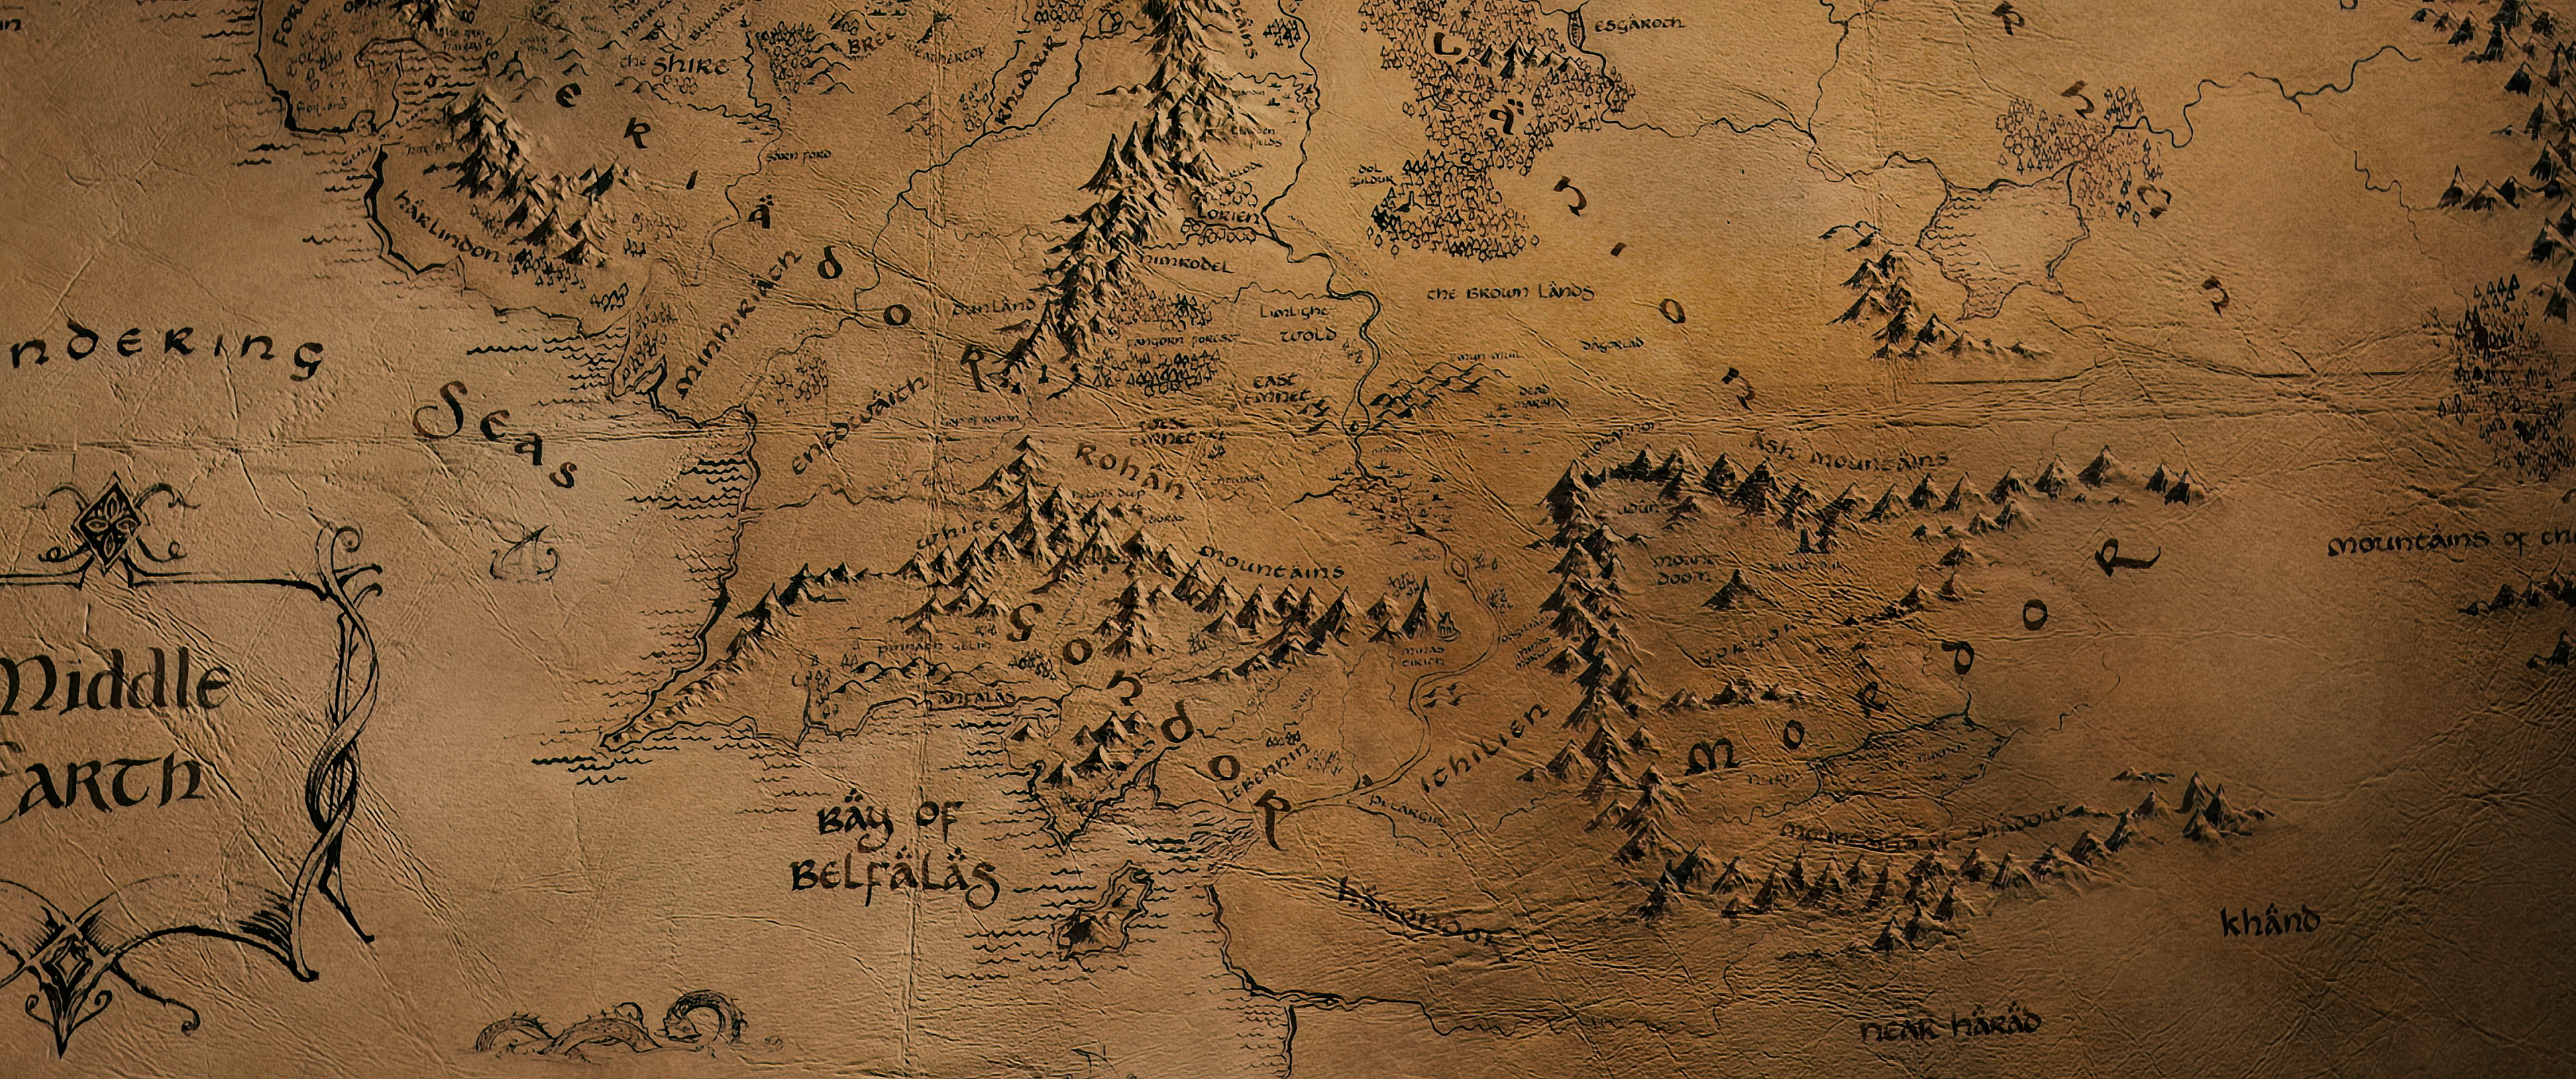 General 3840x1608 The Lord of the Rings: The Fellowship of the Ring Middle-Earth map Topaz DeNoise AI J. R. R. Tolkien digital art ultrawide